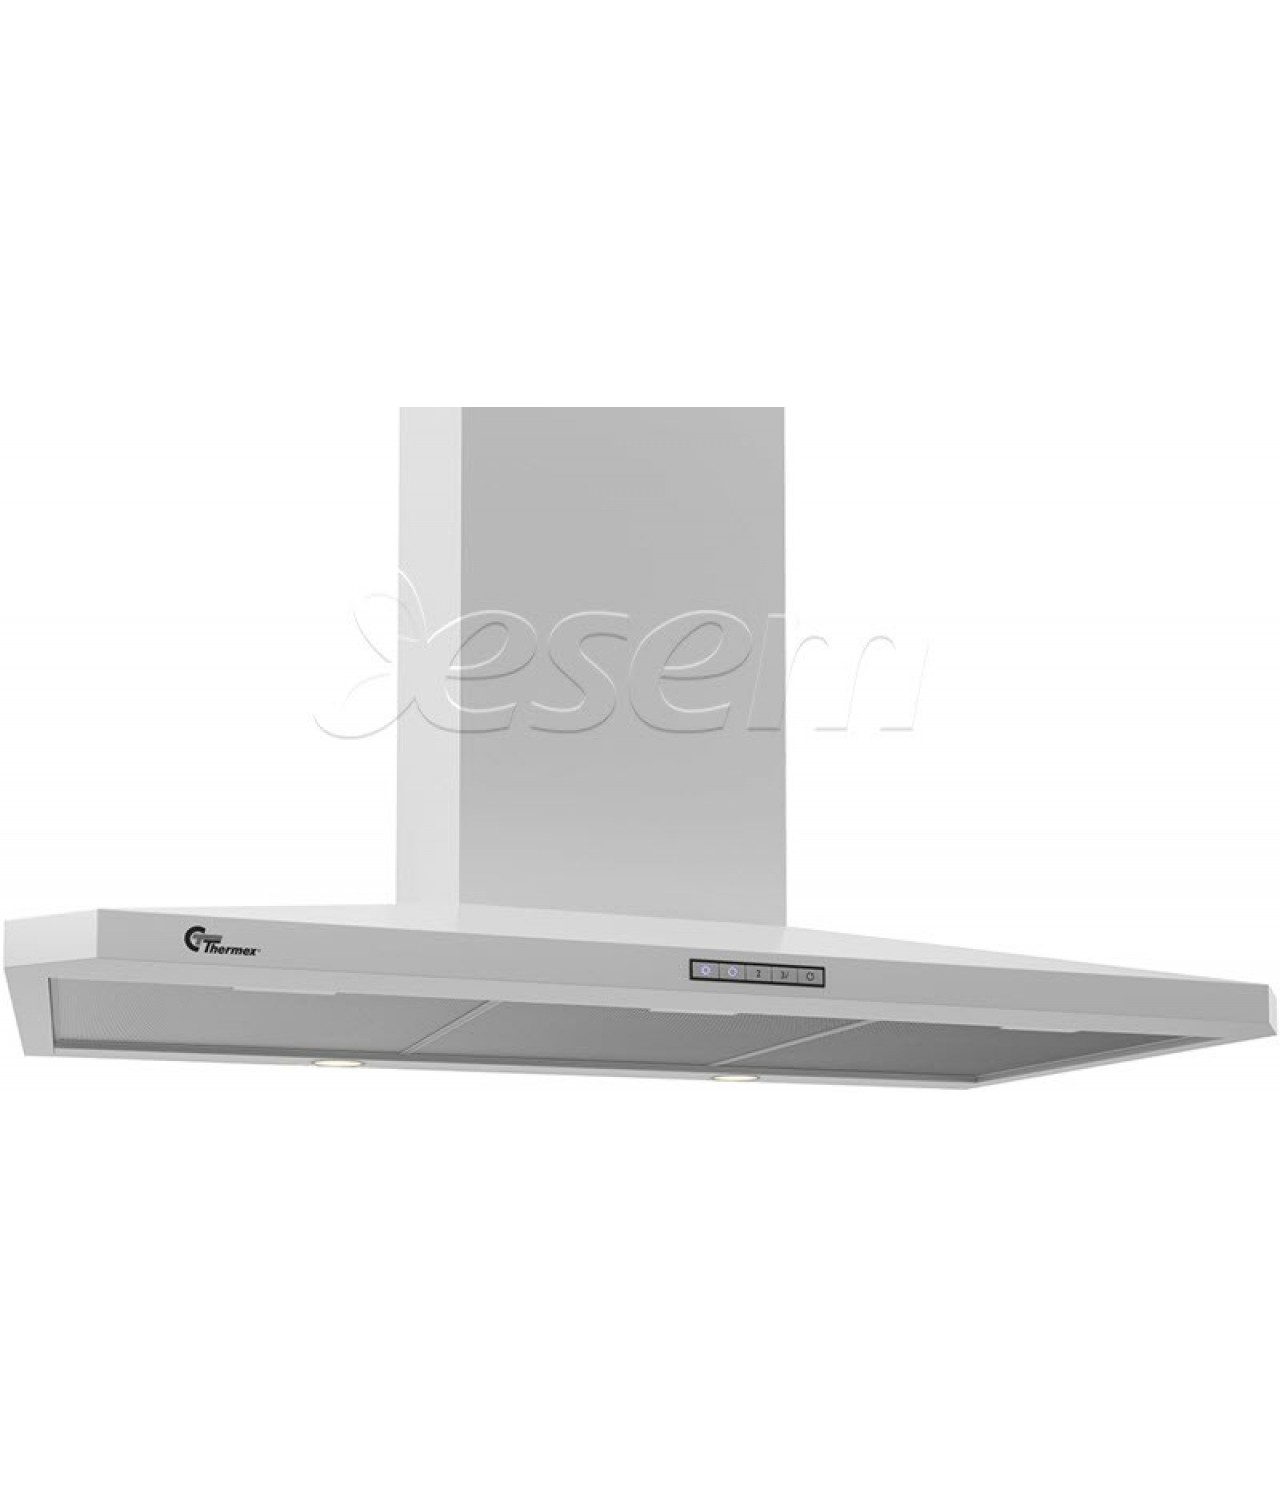 Wall mounted cooker hoods Decor 787 white 900 mm without motor